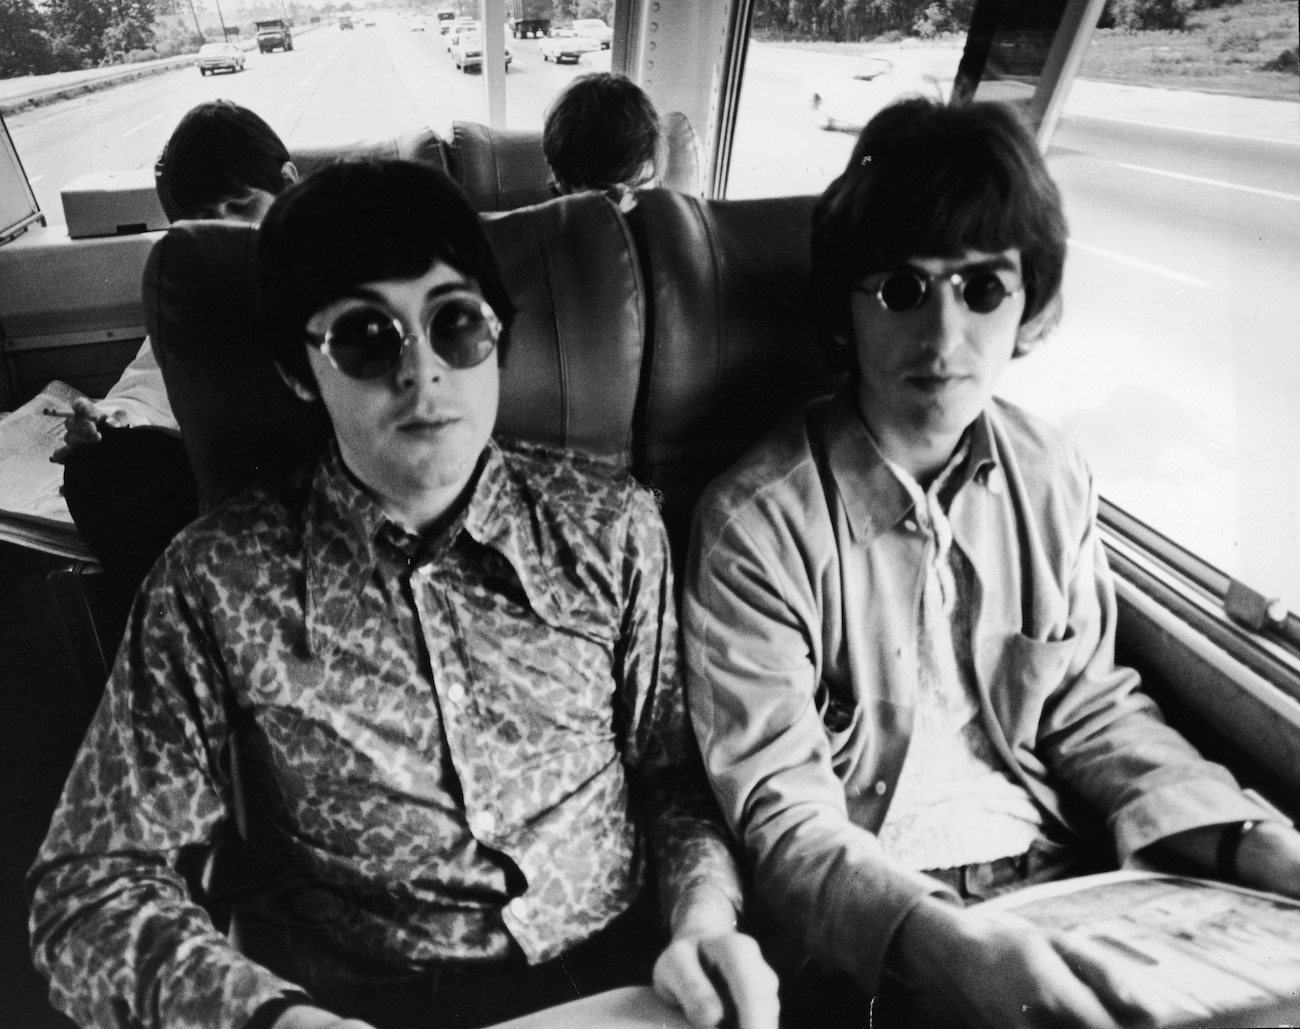 George Harrison and Paul McCartney on a tour bus in America in 1966.